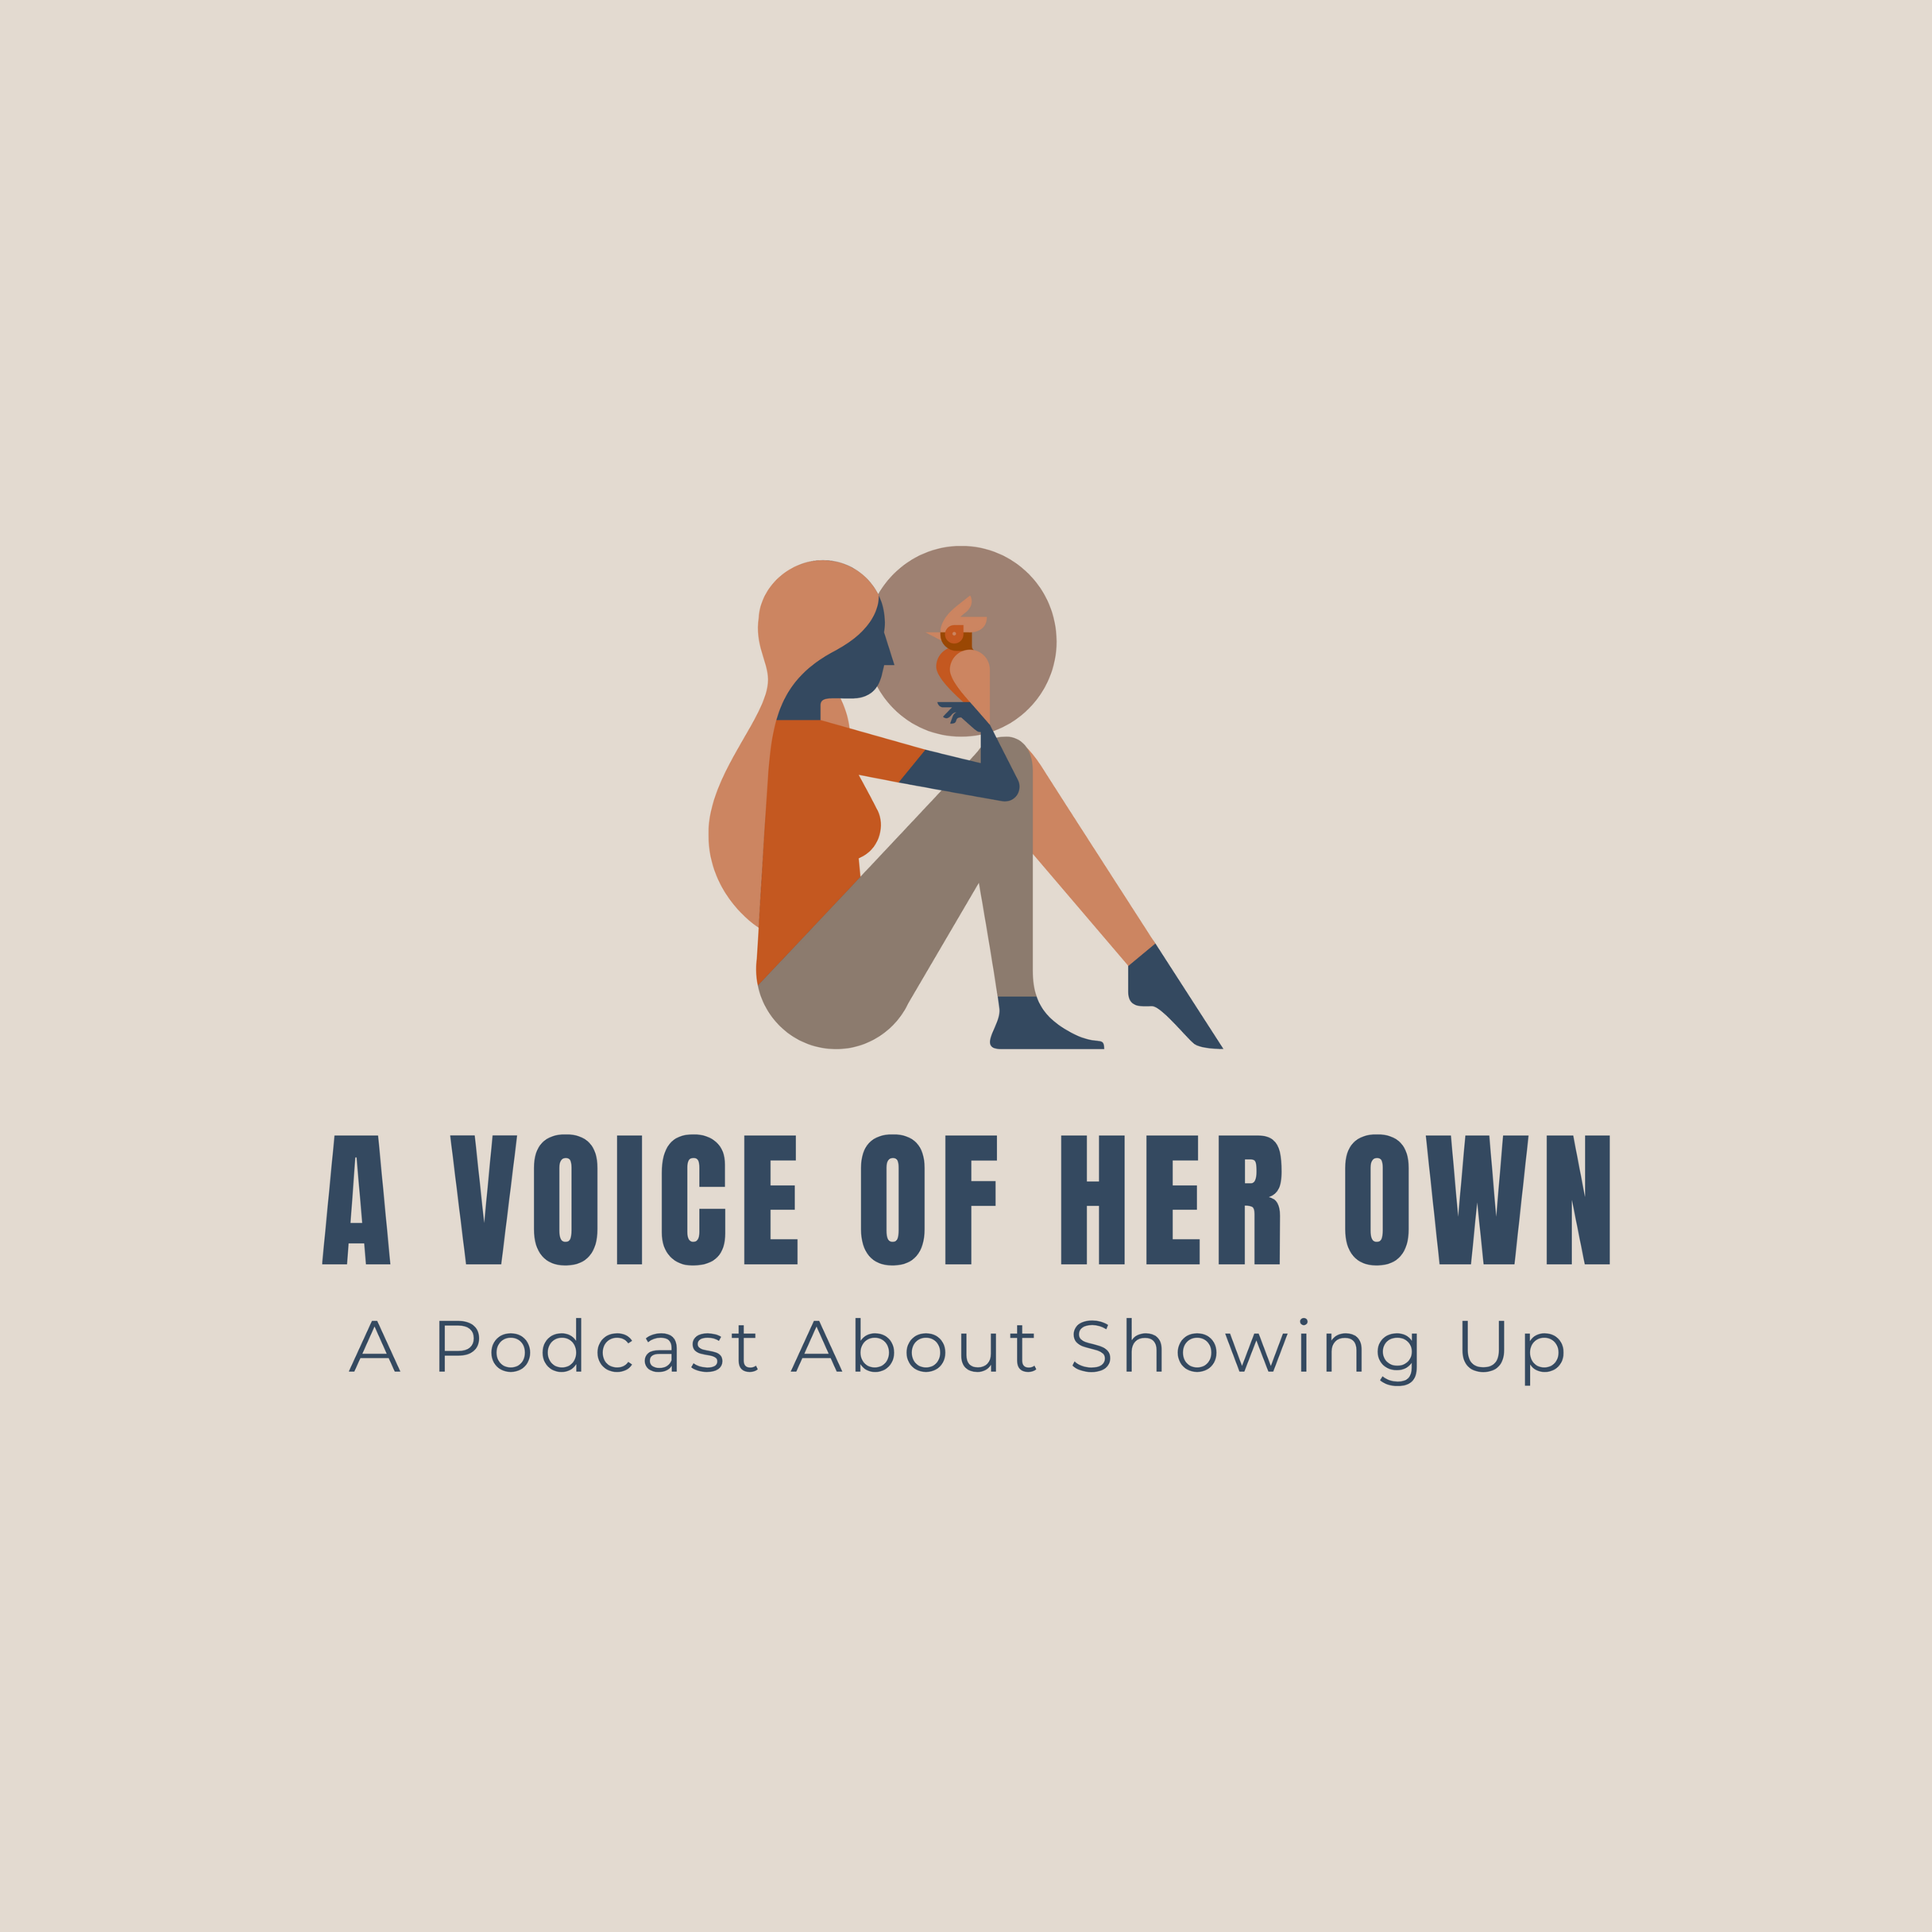 A Voice of Her Own